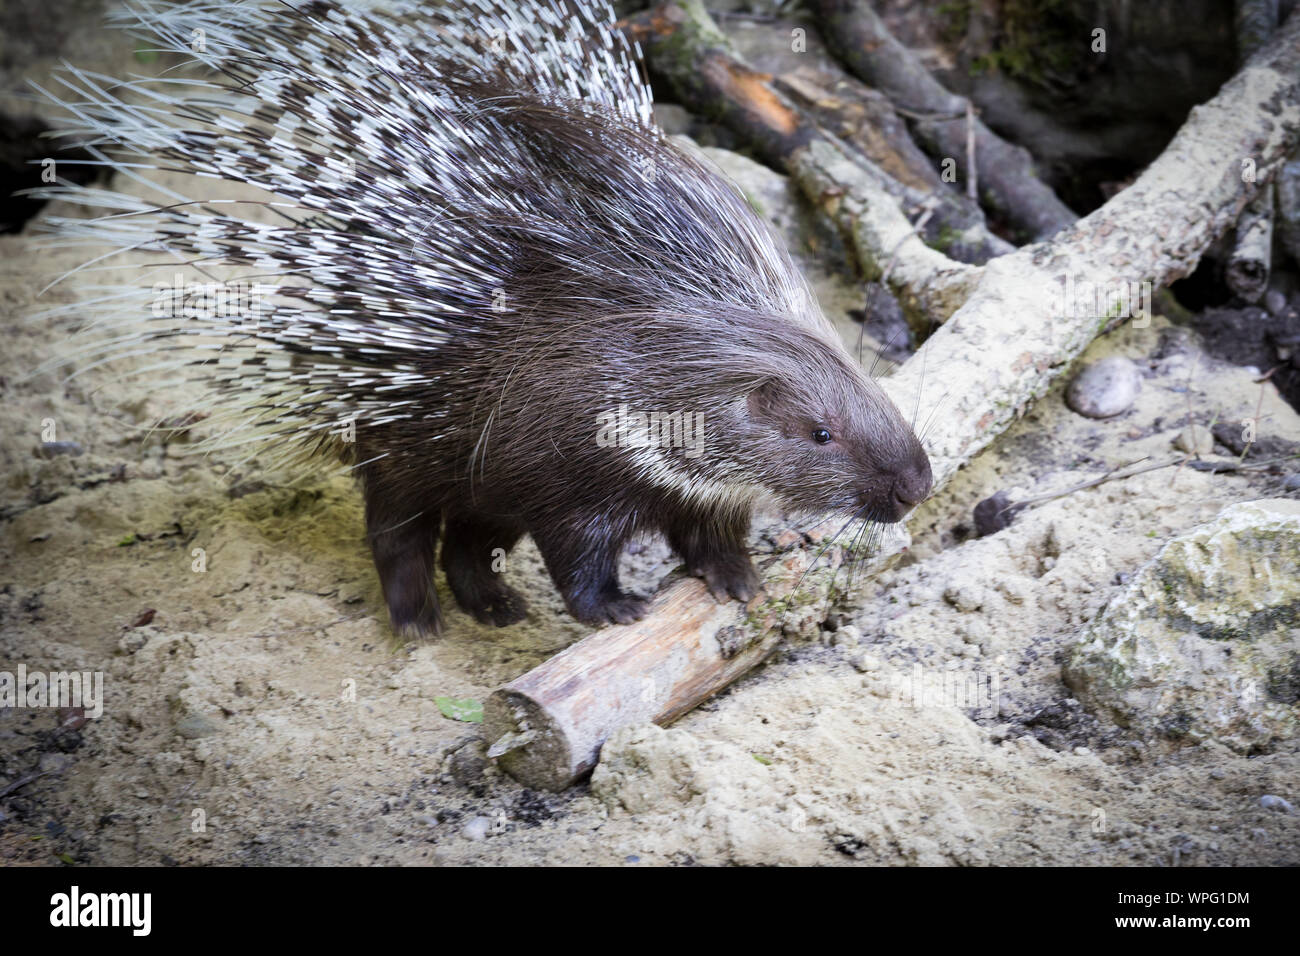 Spiky Indian Crested Porcupine ((Hystrix indica) standing on Sandy Ground. Stock Photo